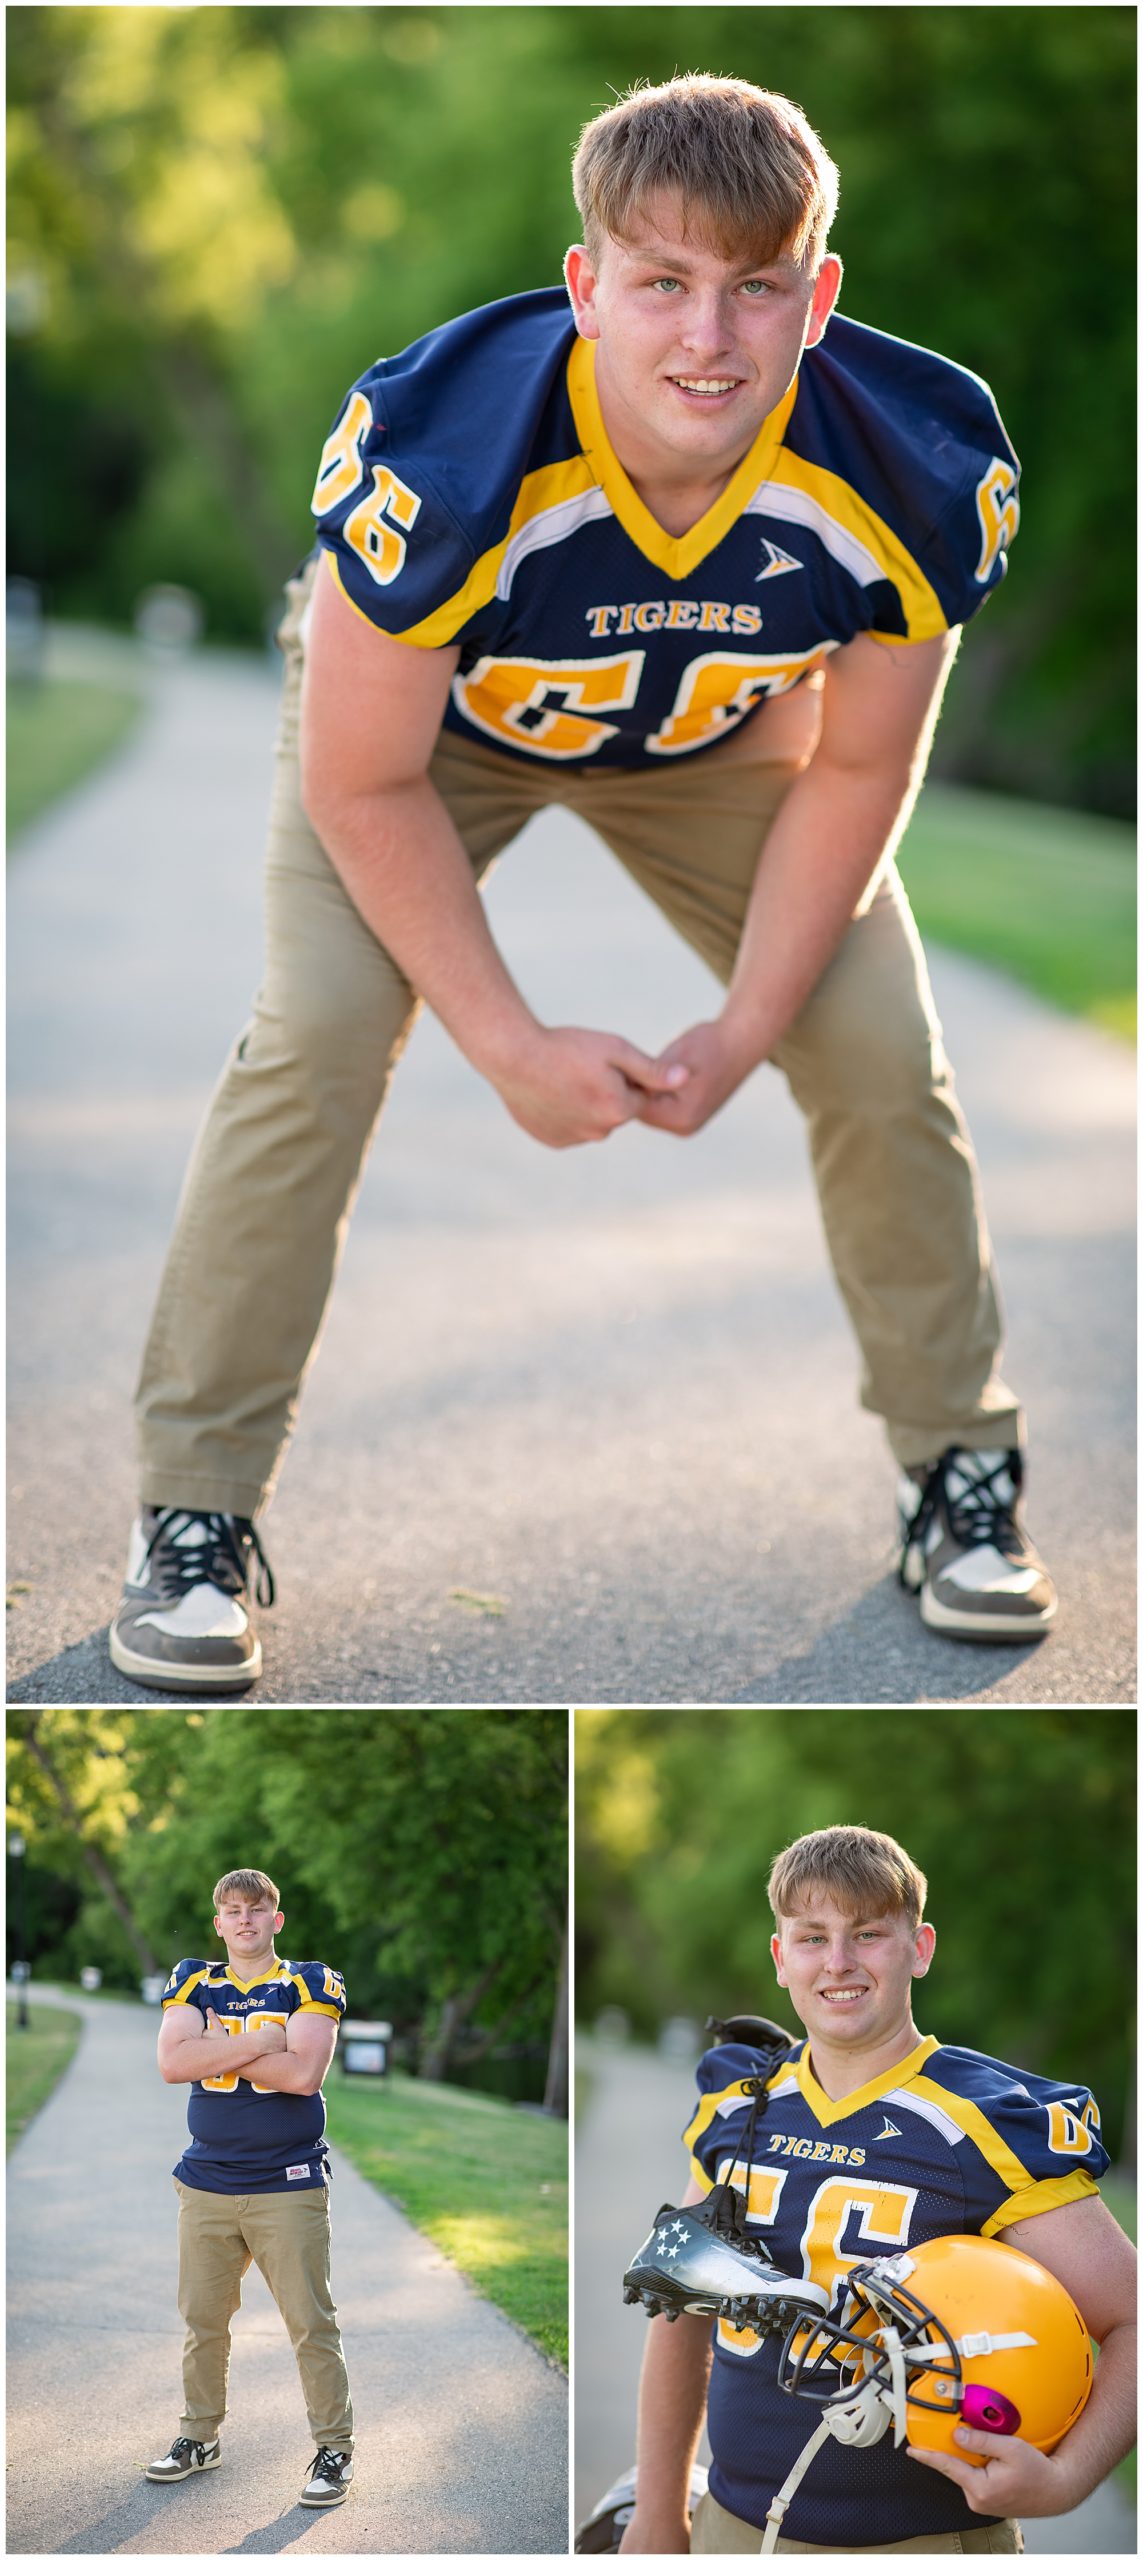 Football themed senior session with Chilton Tiger